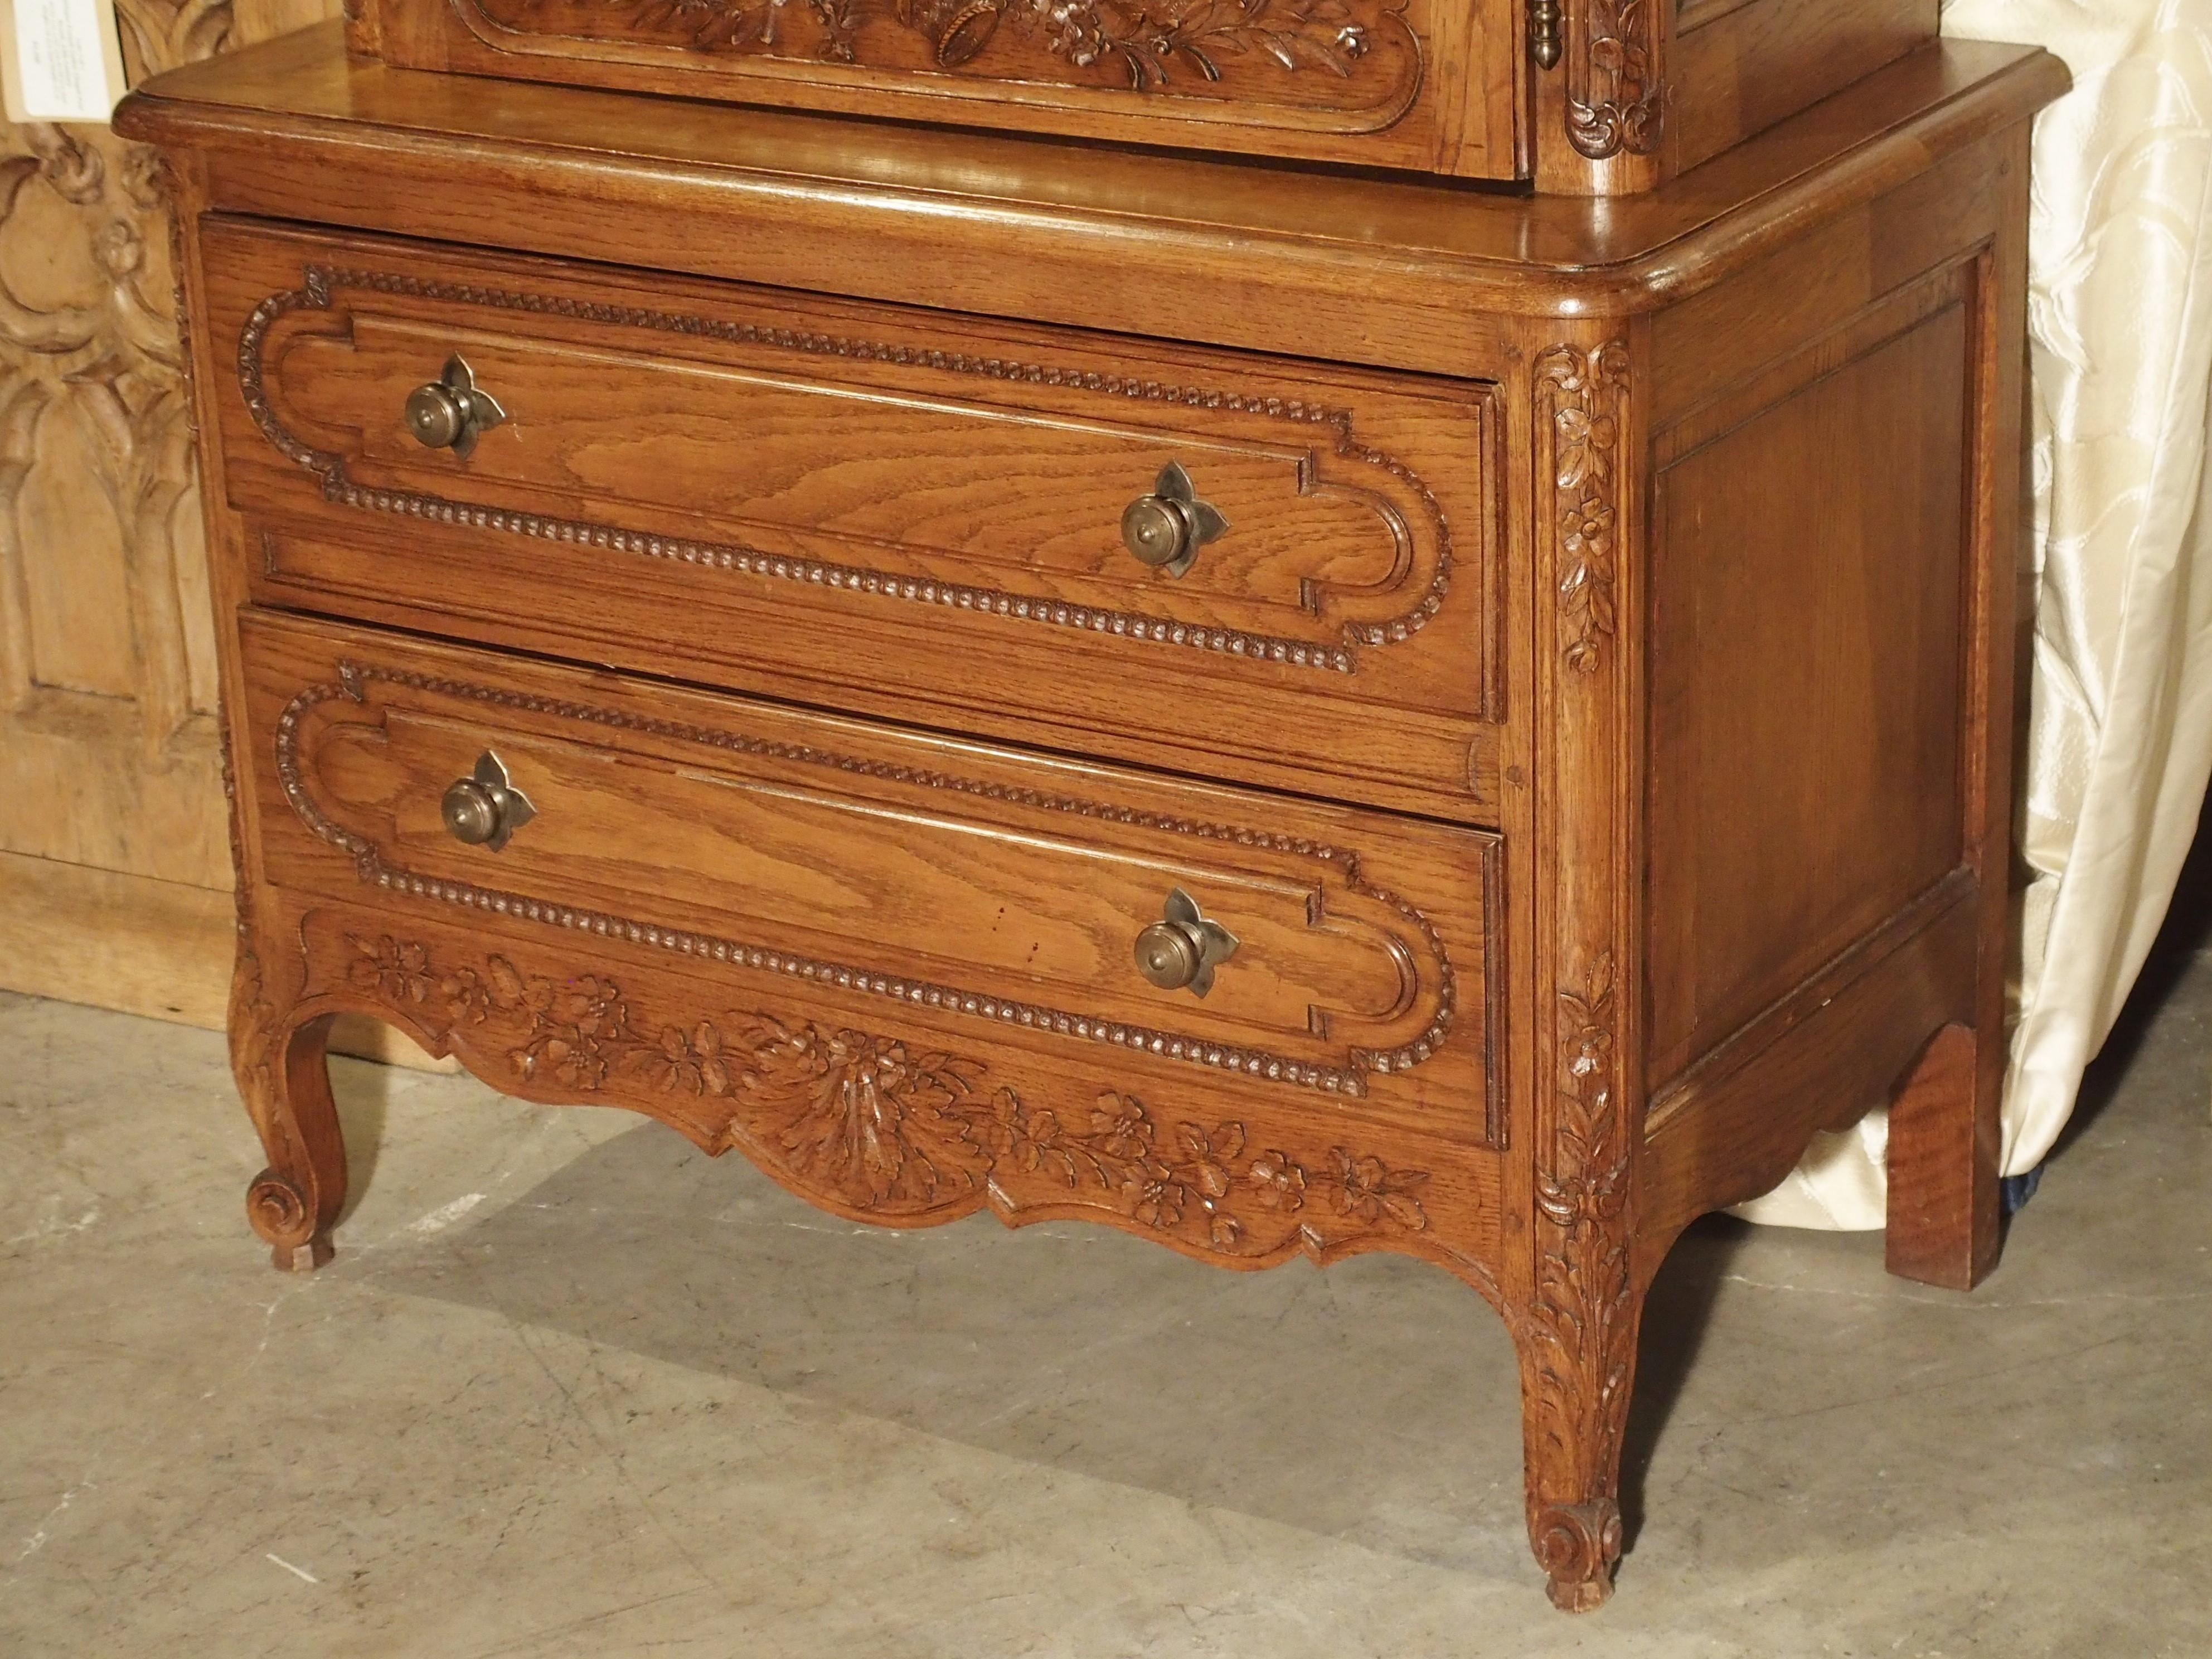 This example of antique furniture has all of the design elements that are typical of pieces from Normandy. However, the combination of a bonnetiere and commode as one piece, is very unusual. During the 18th and 19th centuries, they were almost